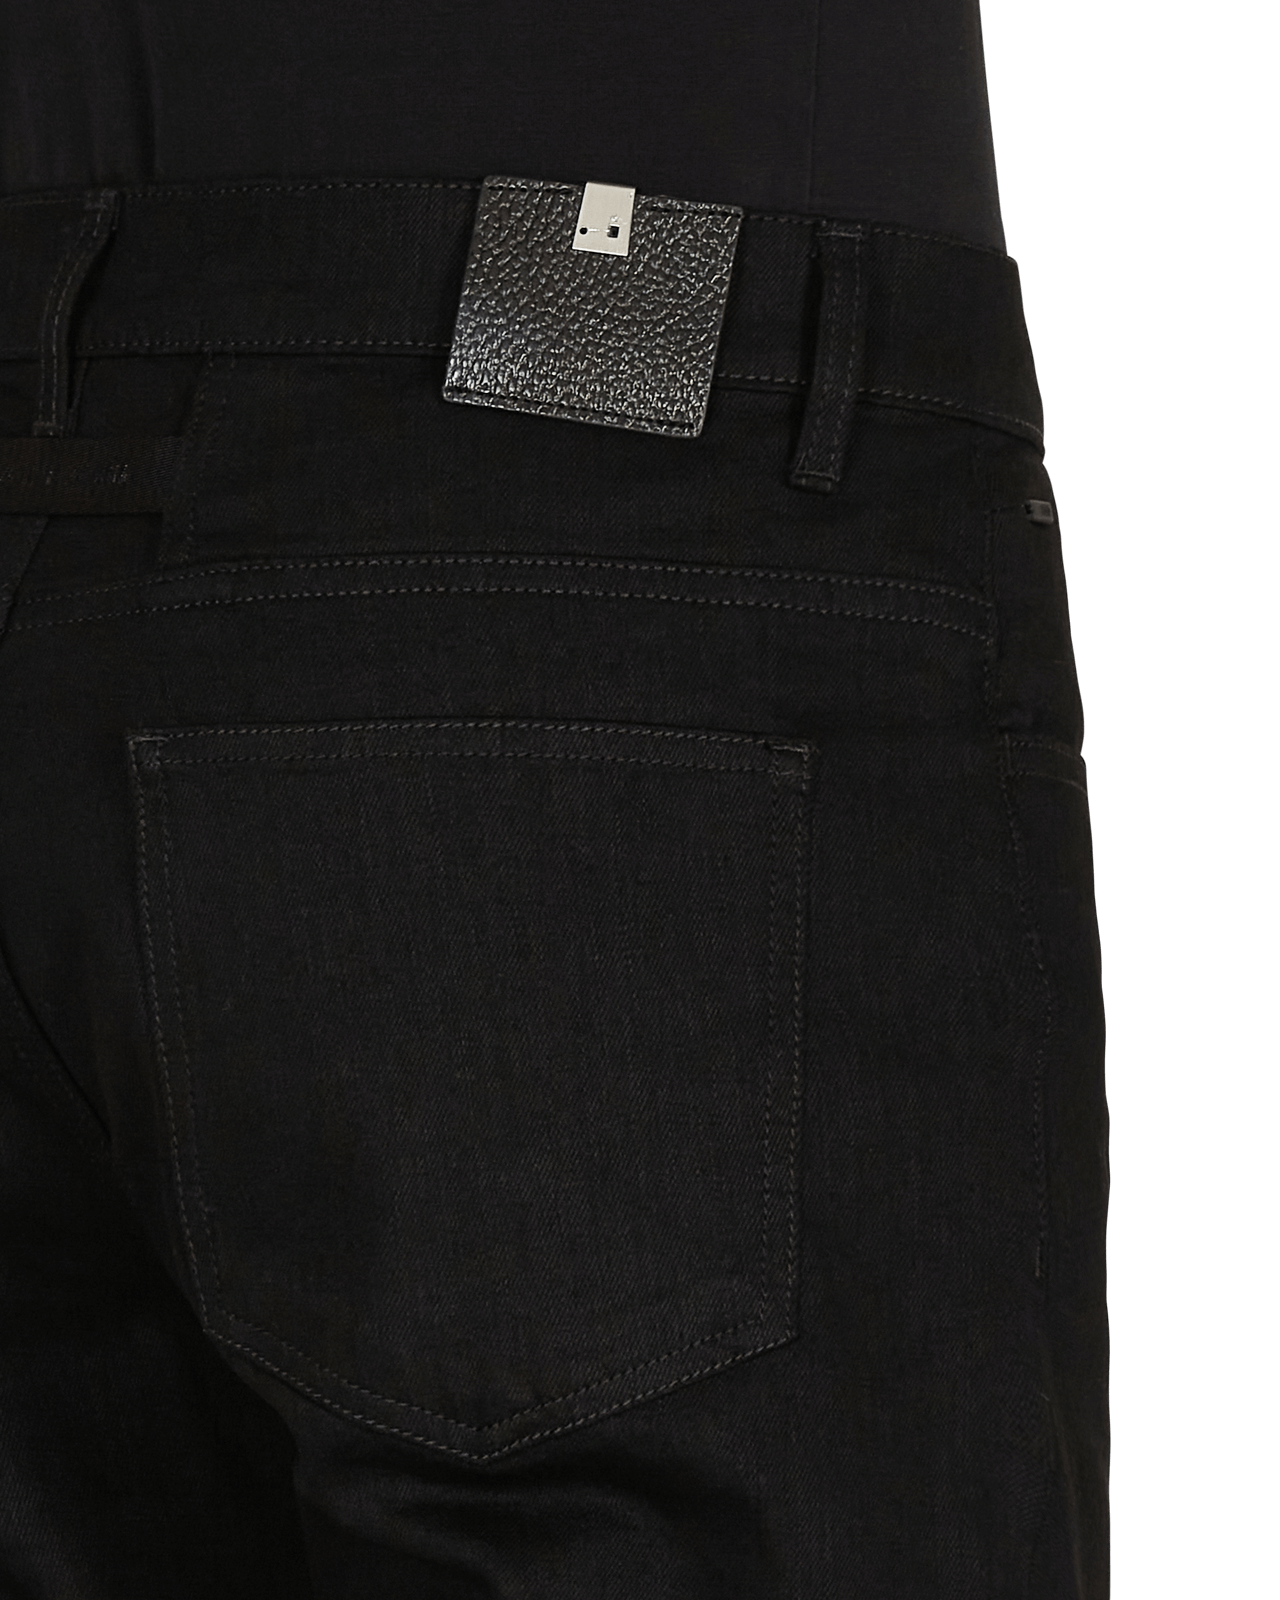 1017 Alyx 9SM True Black 6 Pocket With A Ring Black Pants Trousers AAMPA0212FA02 BLK0001